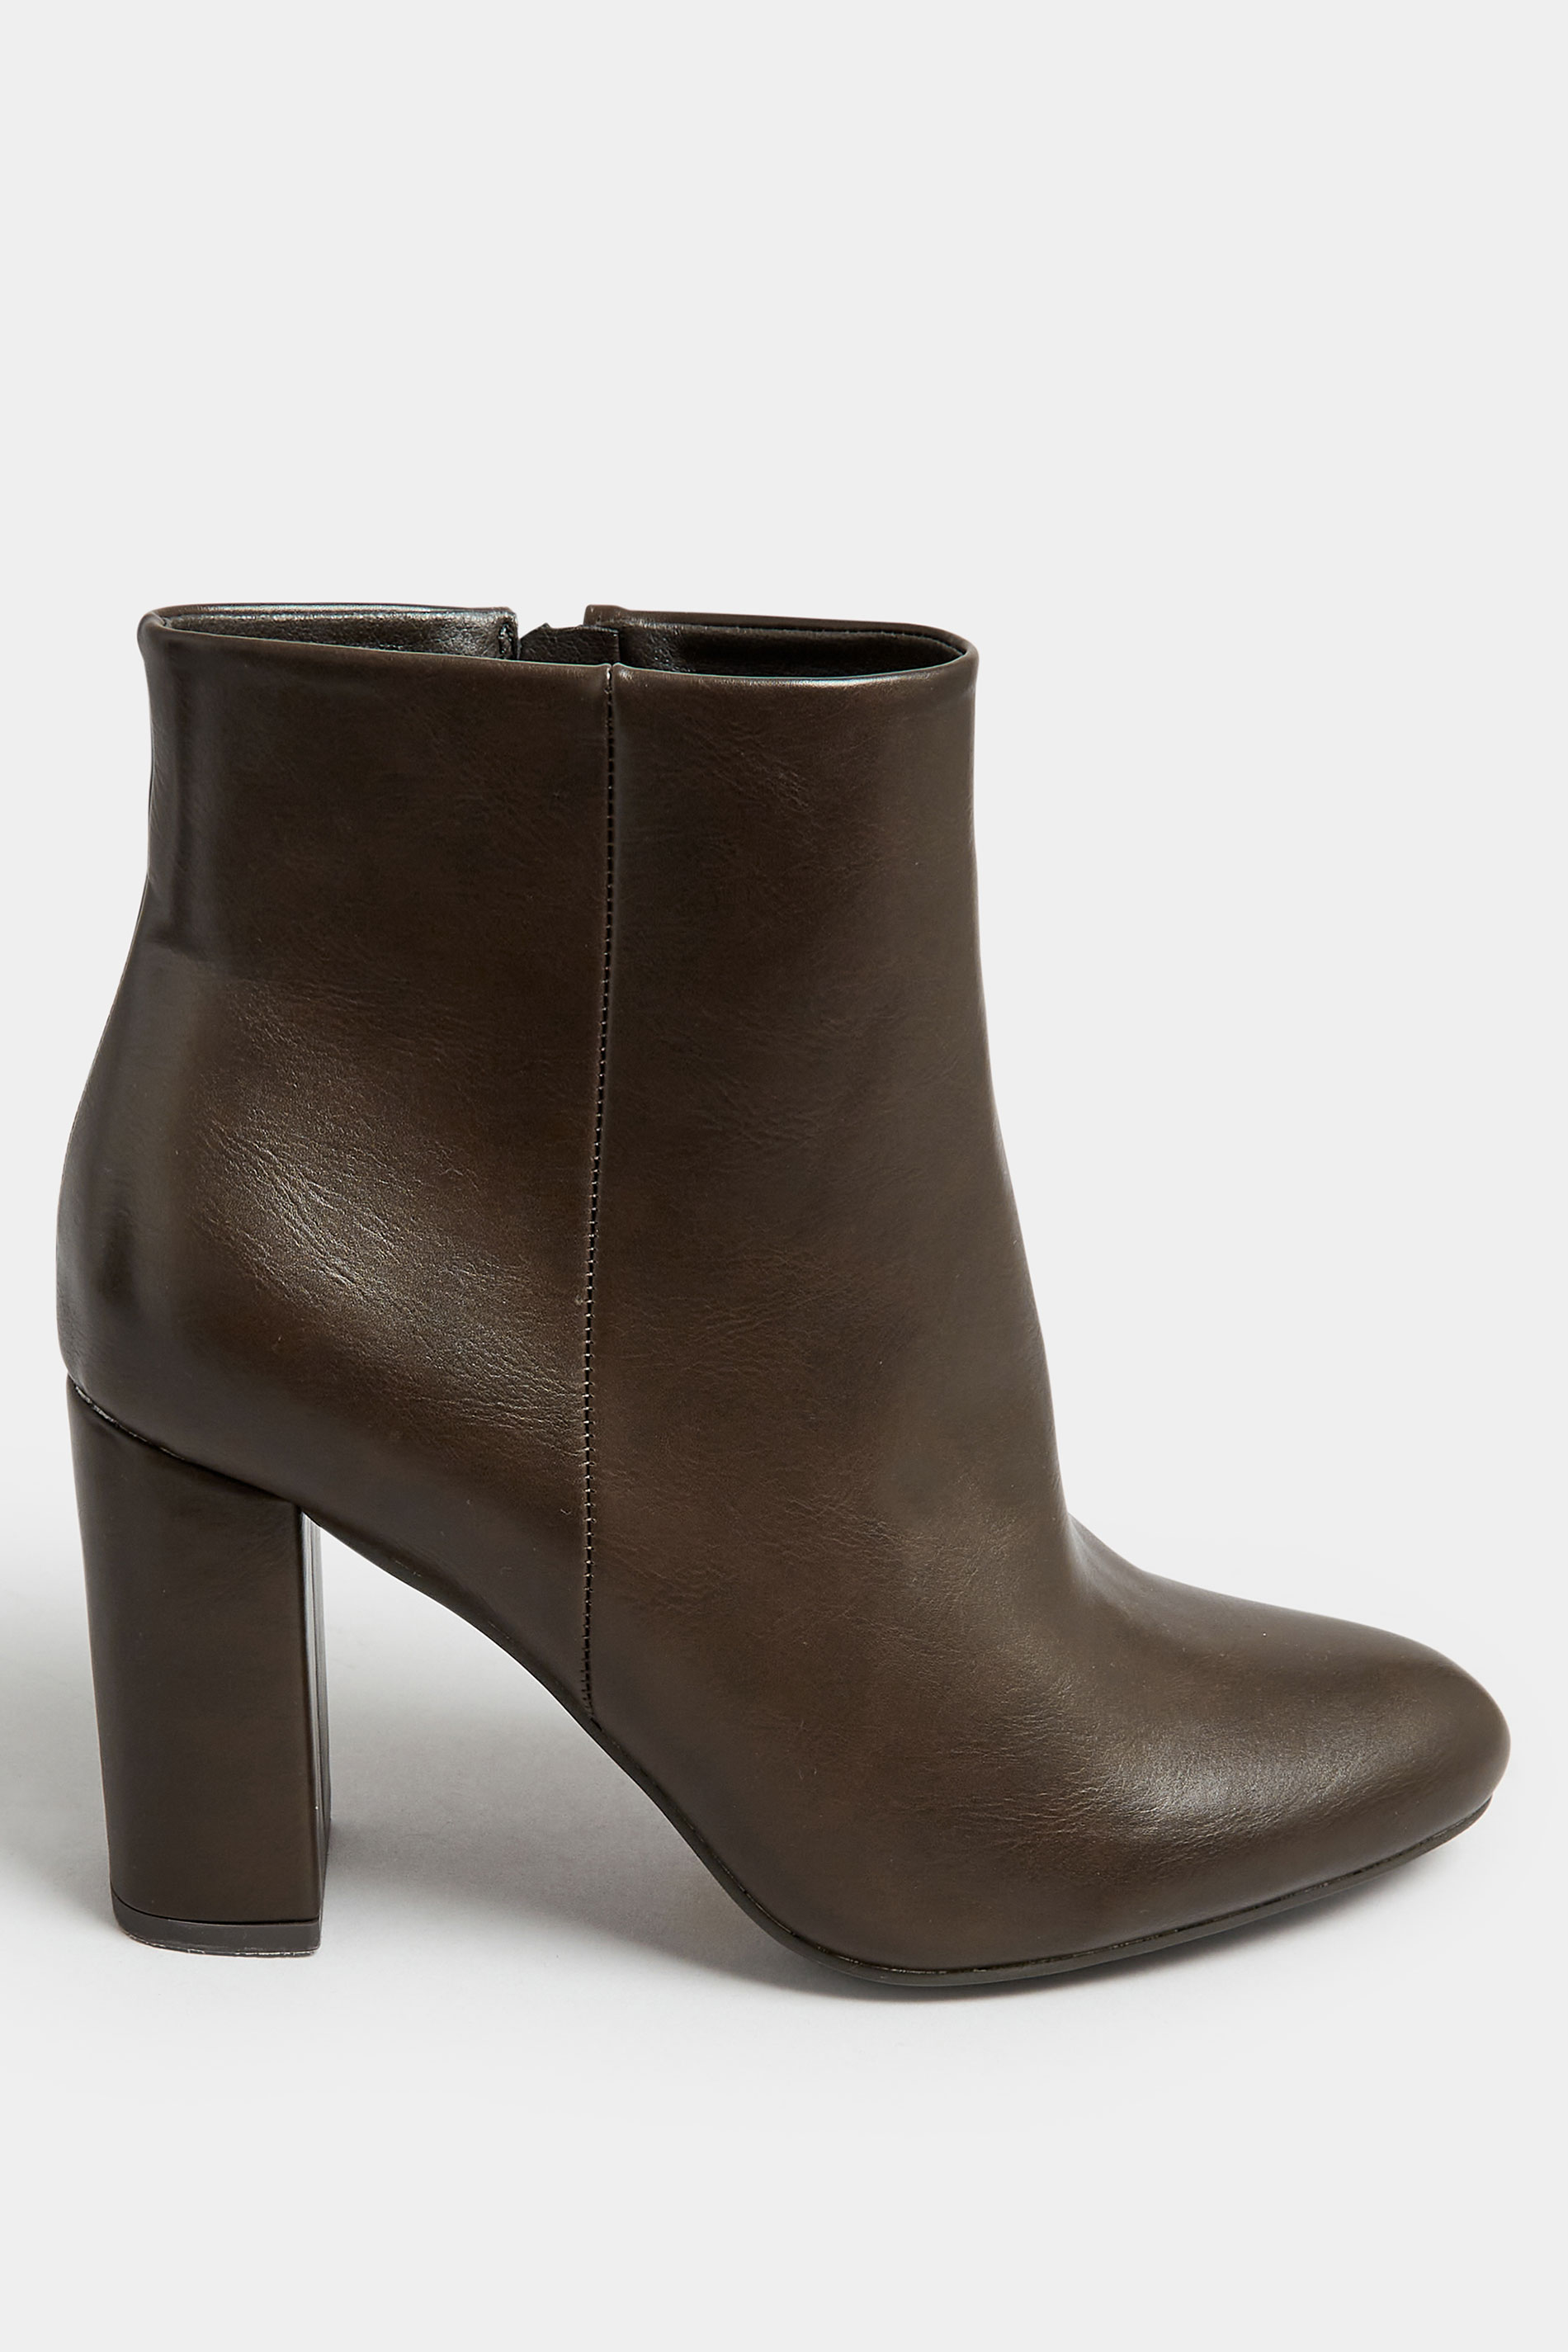 LIMITED COLLECTION Brown Heeled Ankle Boots In Extra Wide EEE Fit | Yours Clothing  3